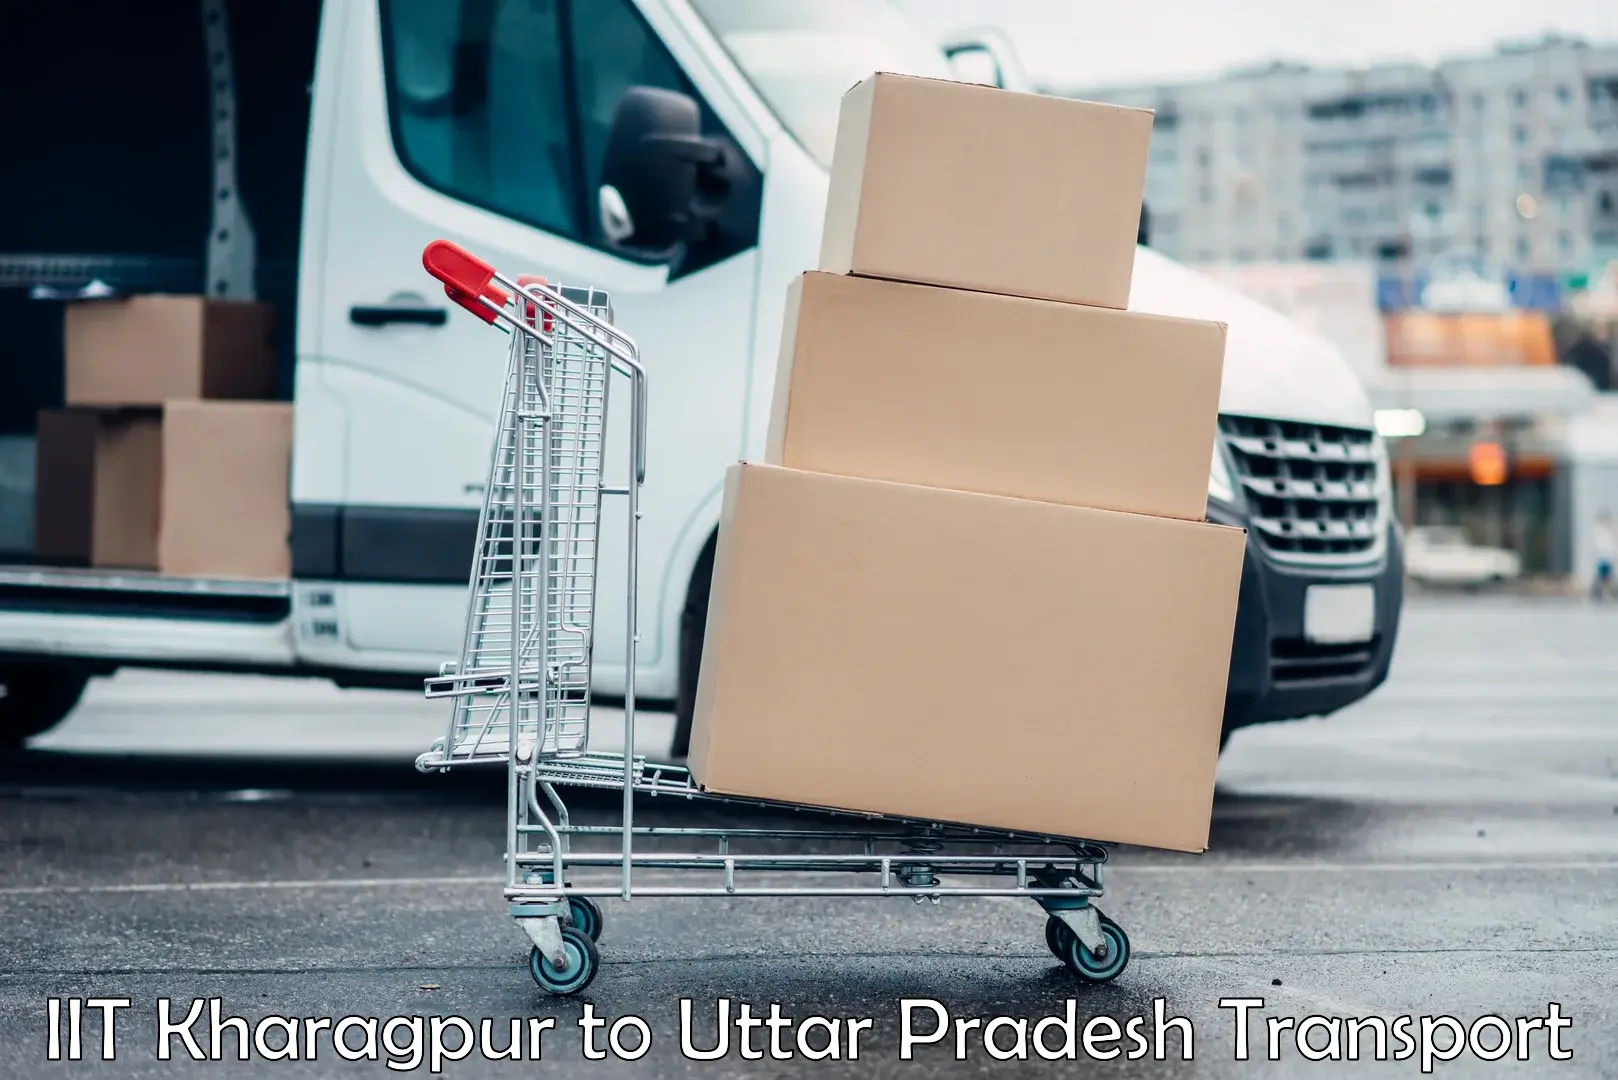 Daily transport service IIT Kharagpur to Behat